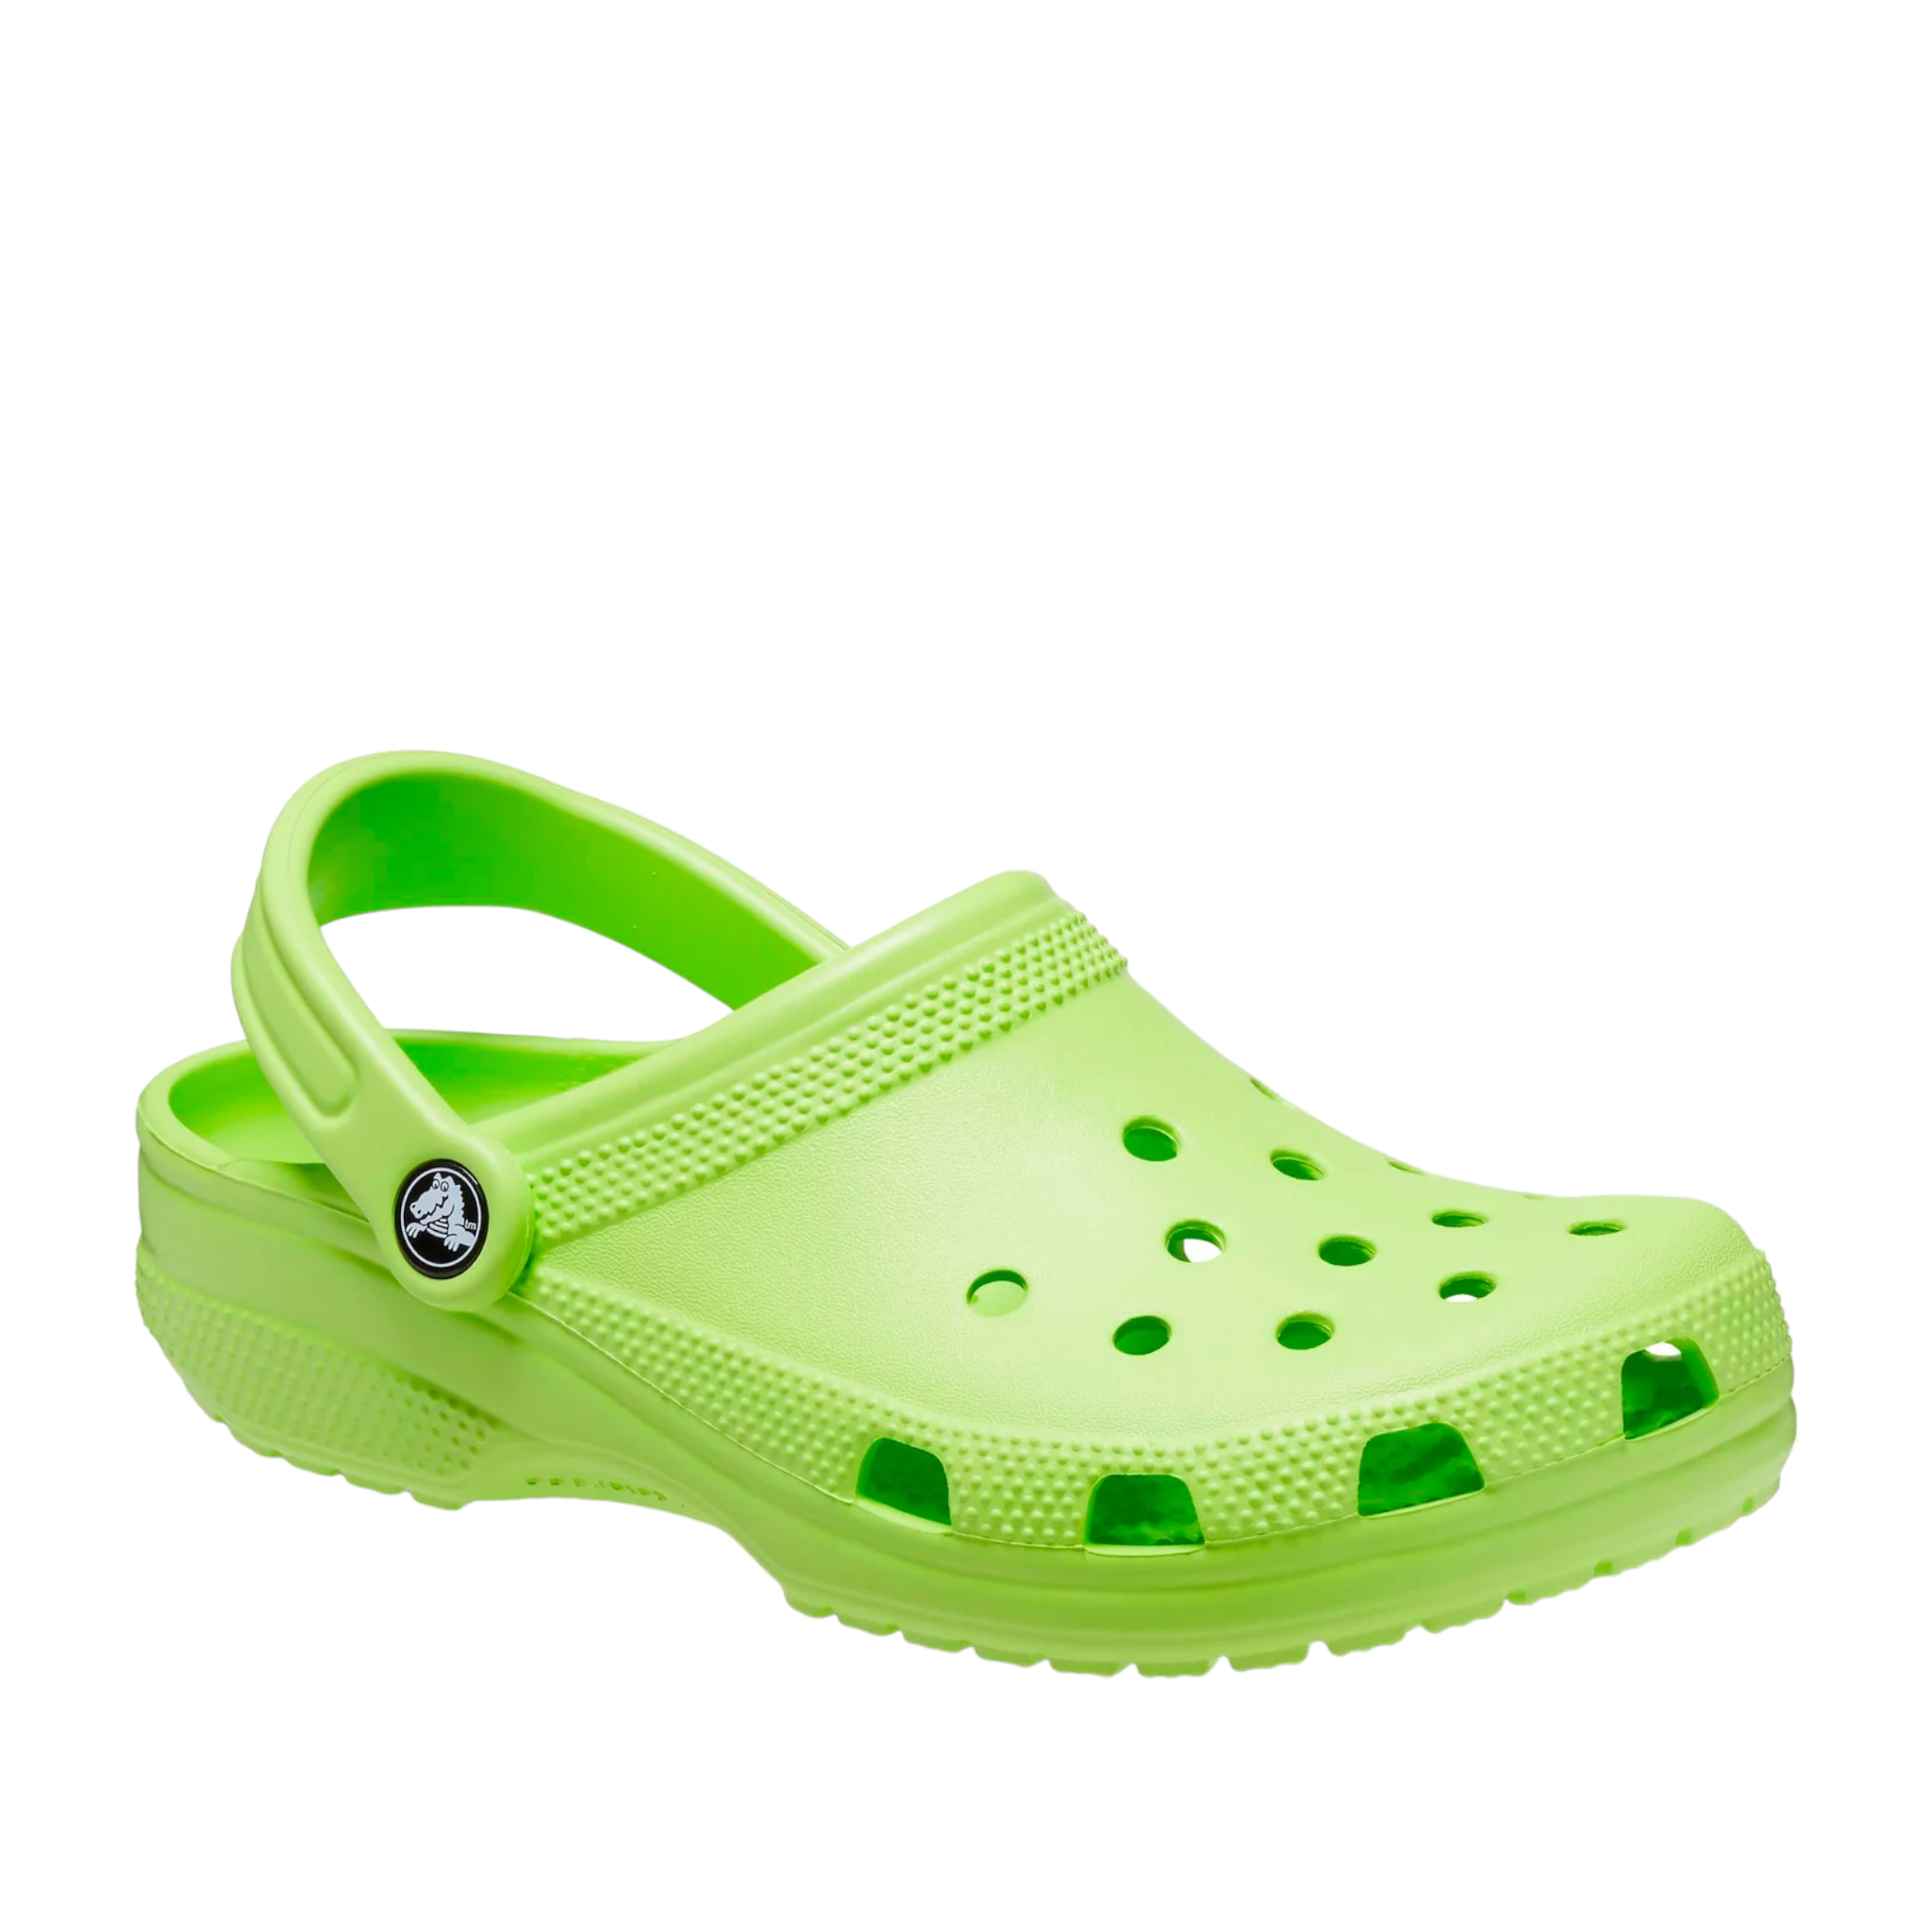 Crocs Classic Clogs online and instore with shoe&me Mount Maunganui. Shop limeade Clogs